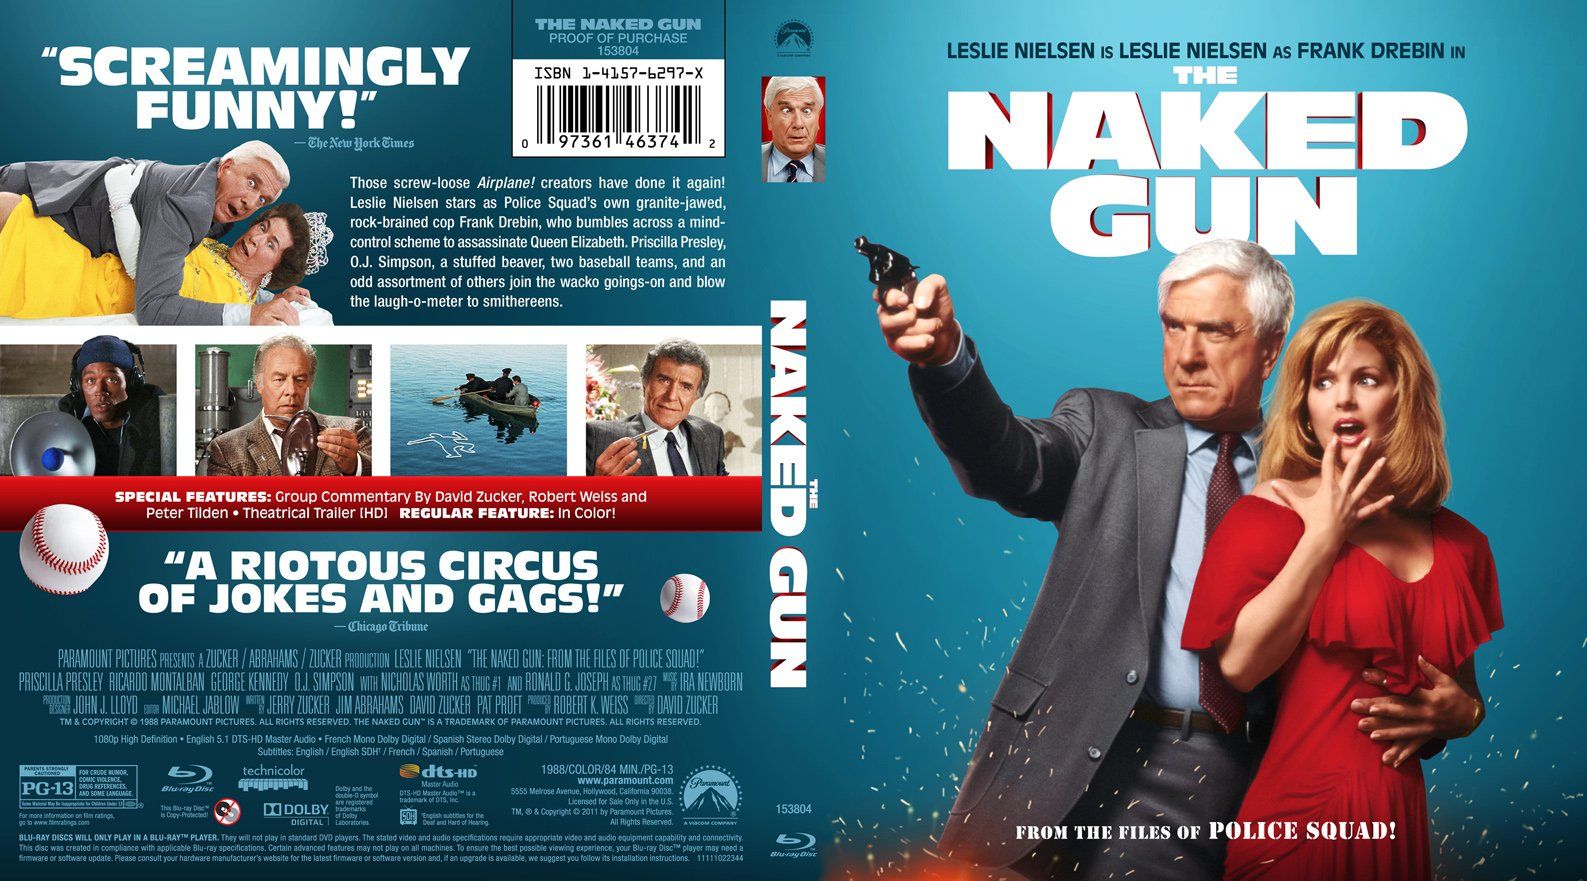 And the naked gun